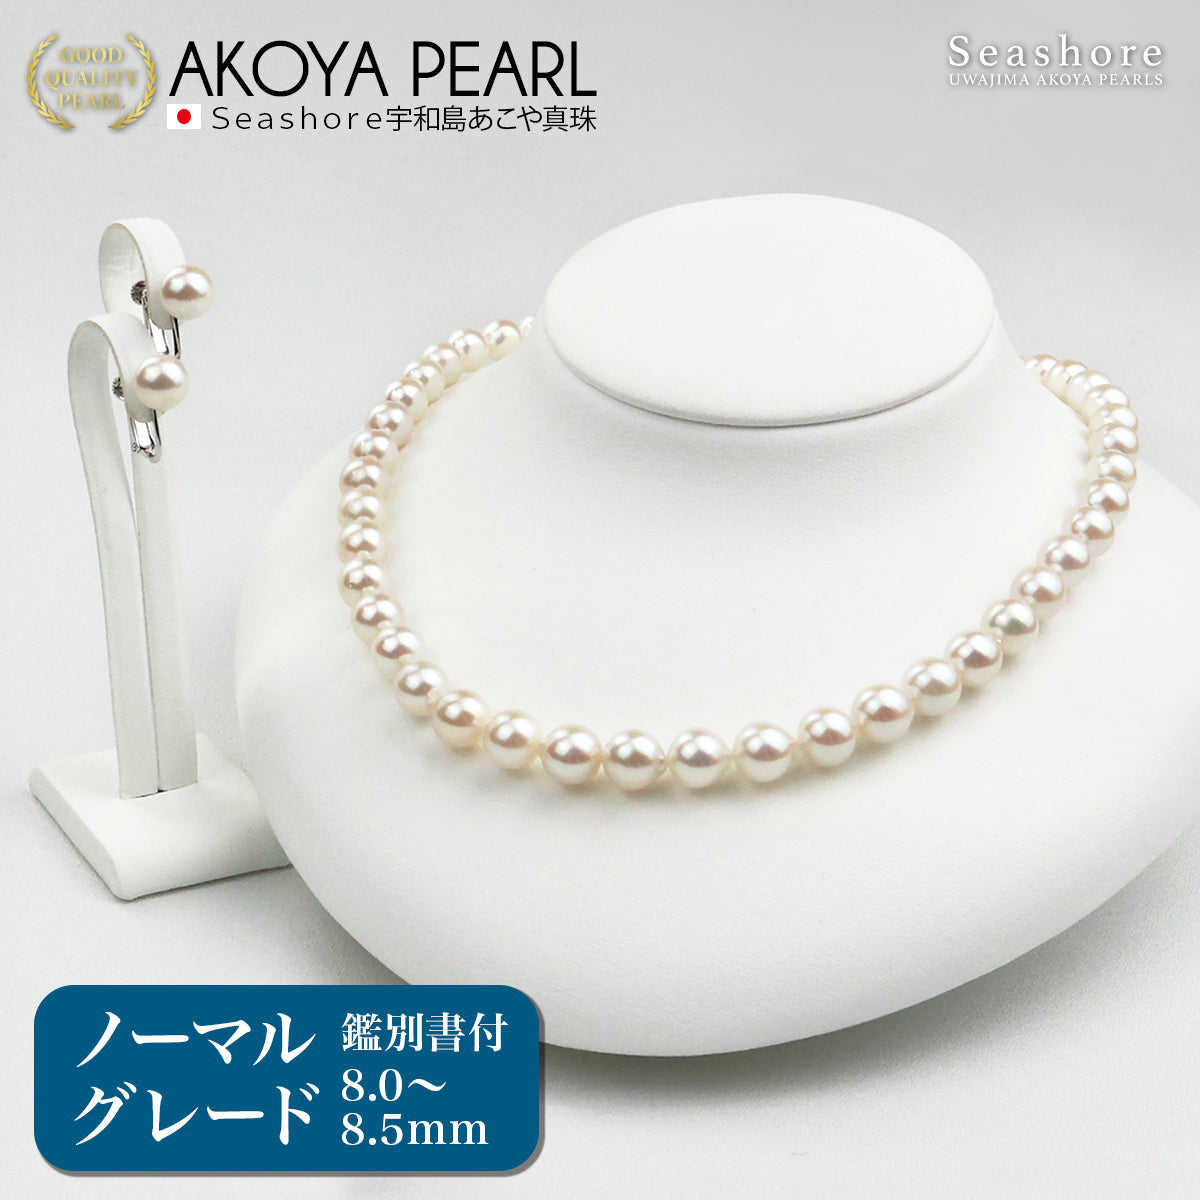 Akoya Pearl Formal Necklace Set of 2 [8.0-8.5mm] (Earrings included) Formal Set with Certificate of Authenticity and Storage Case [TV Shopping]